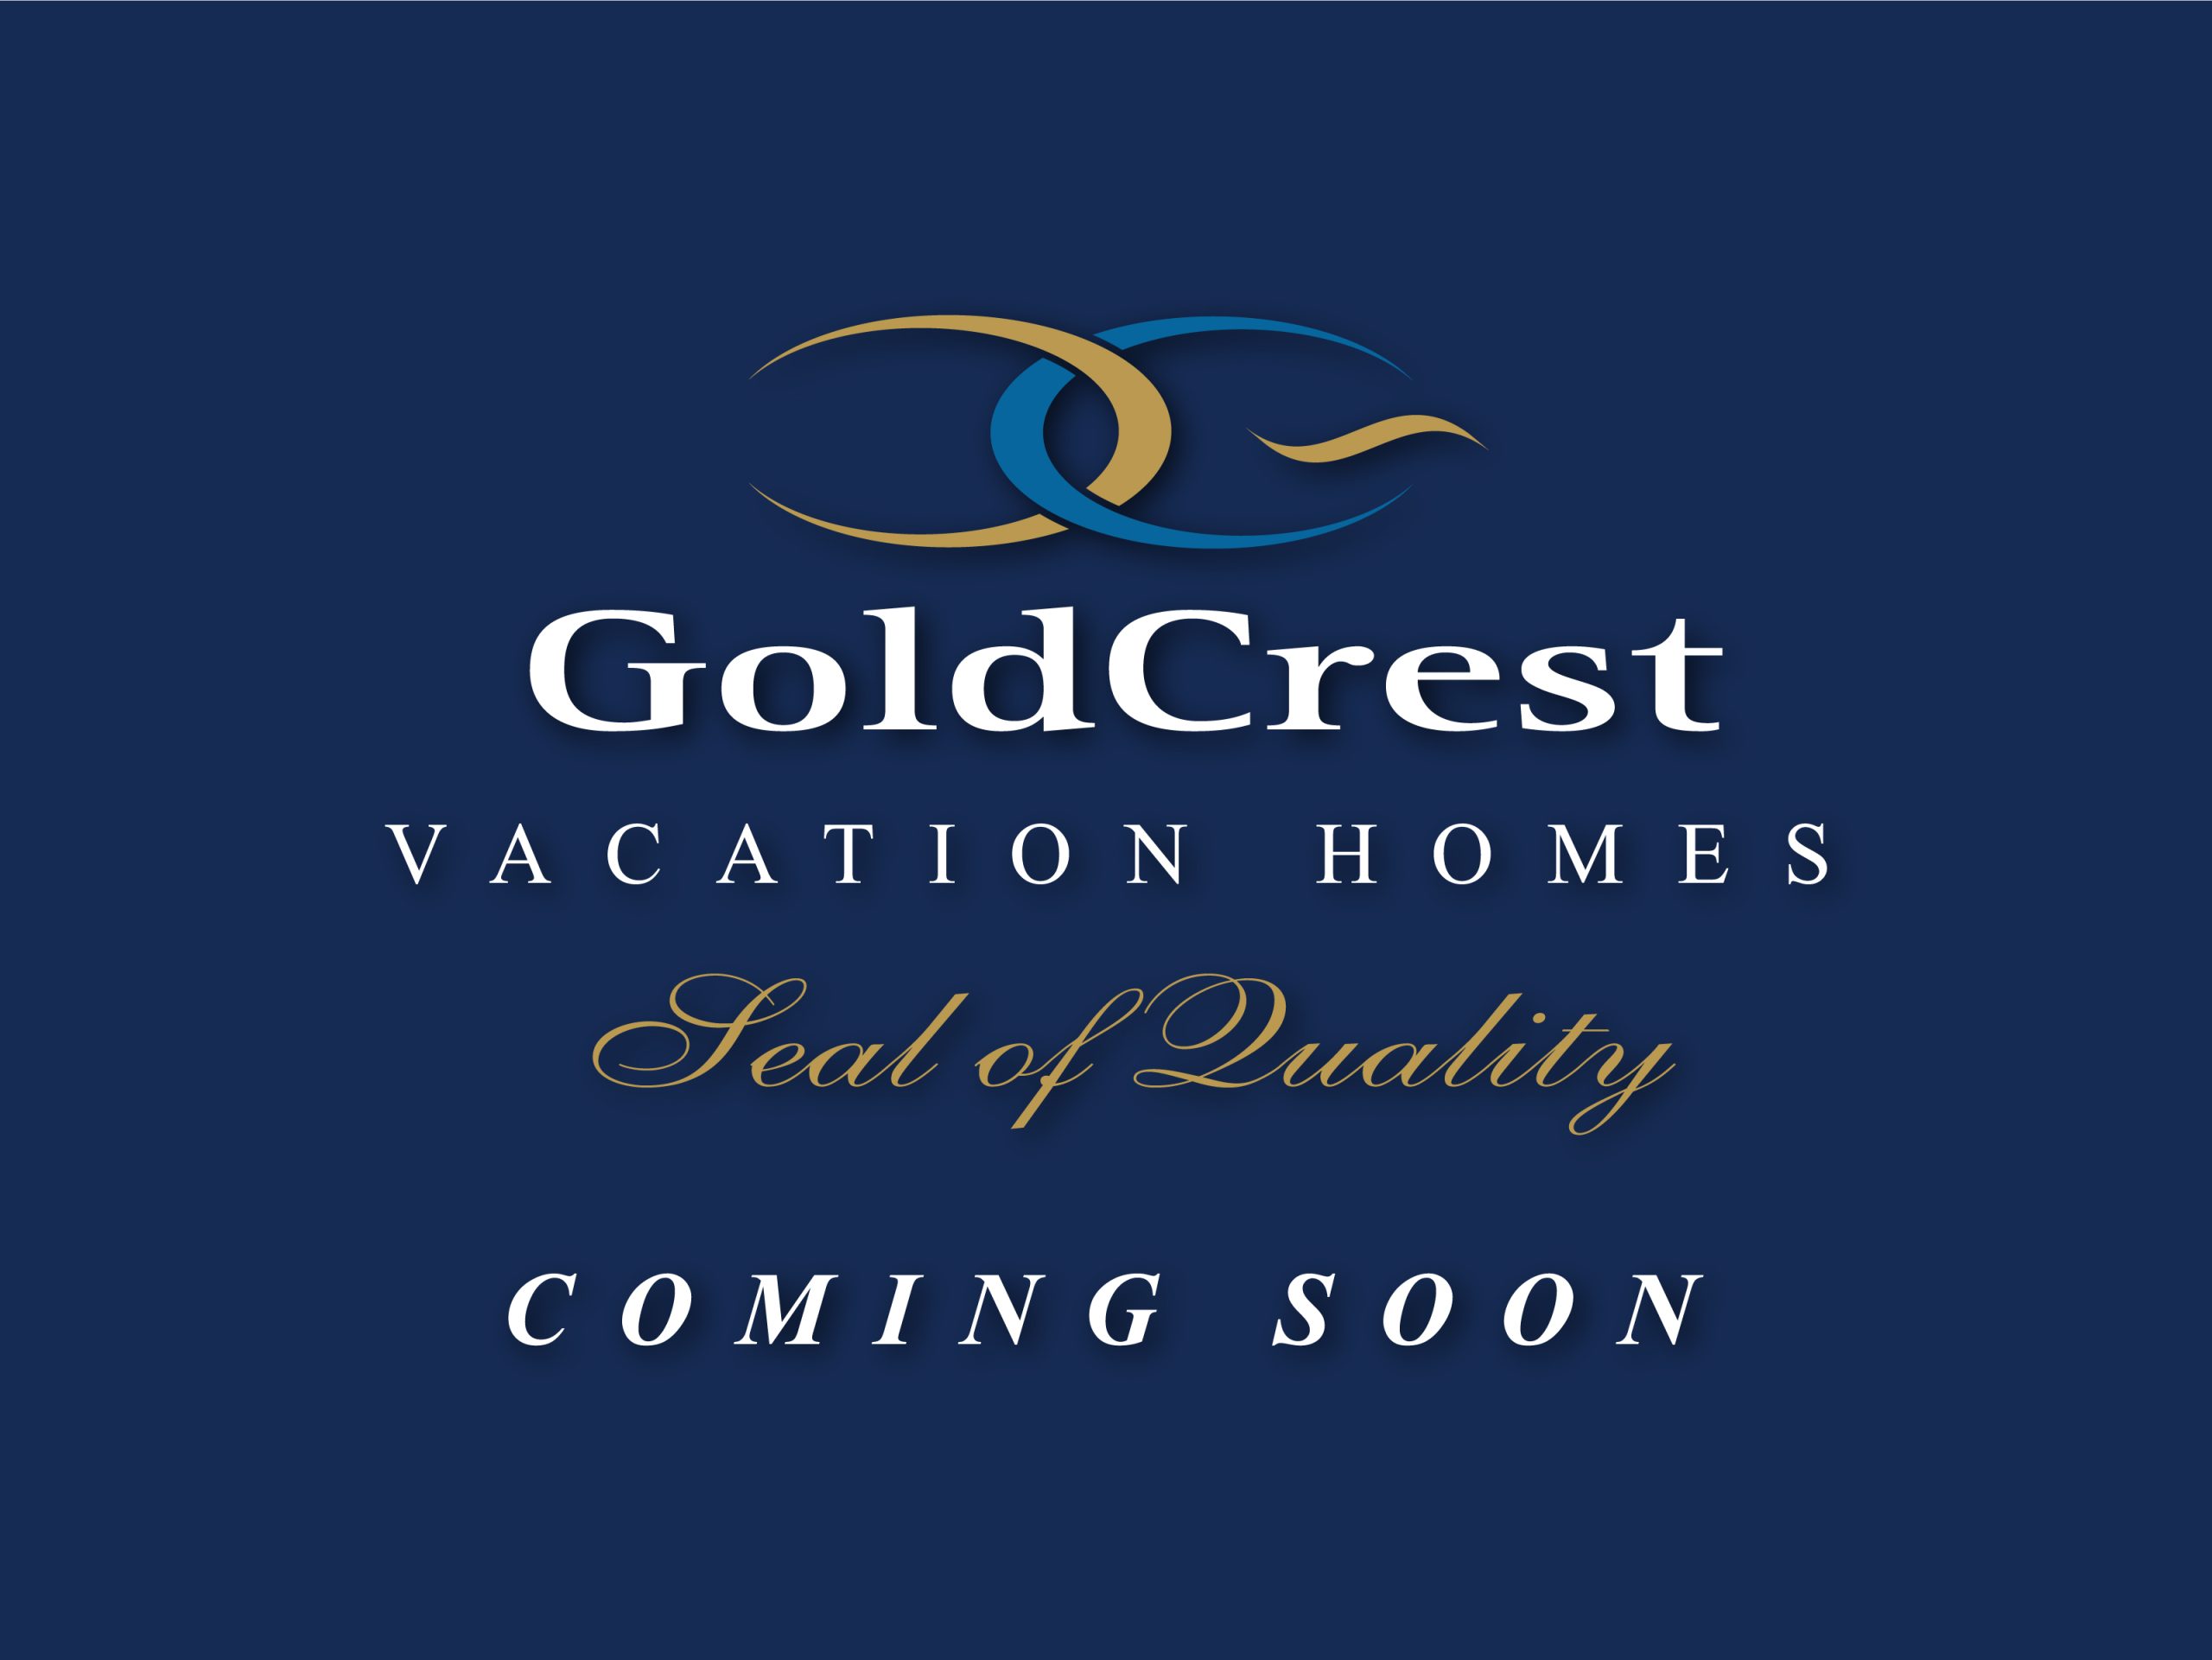 Goldcrest vacation homes